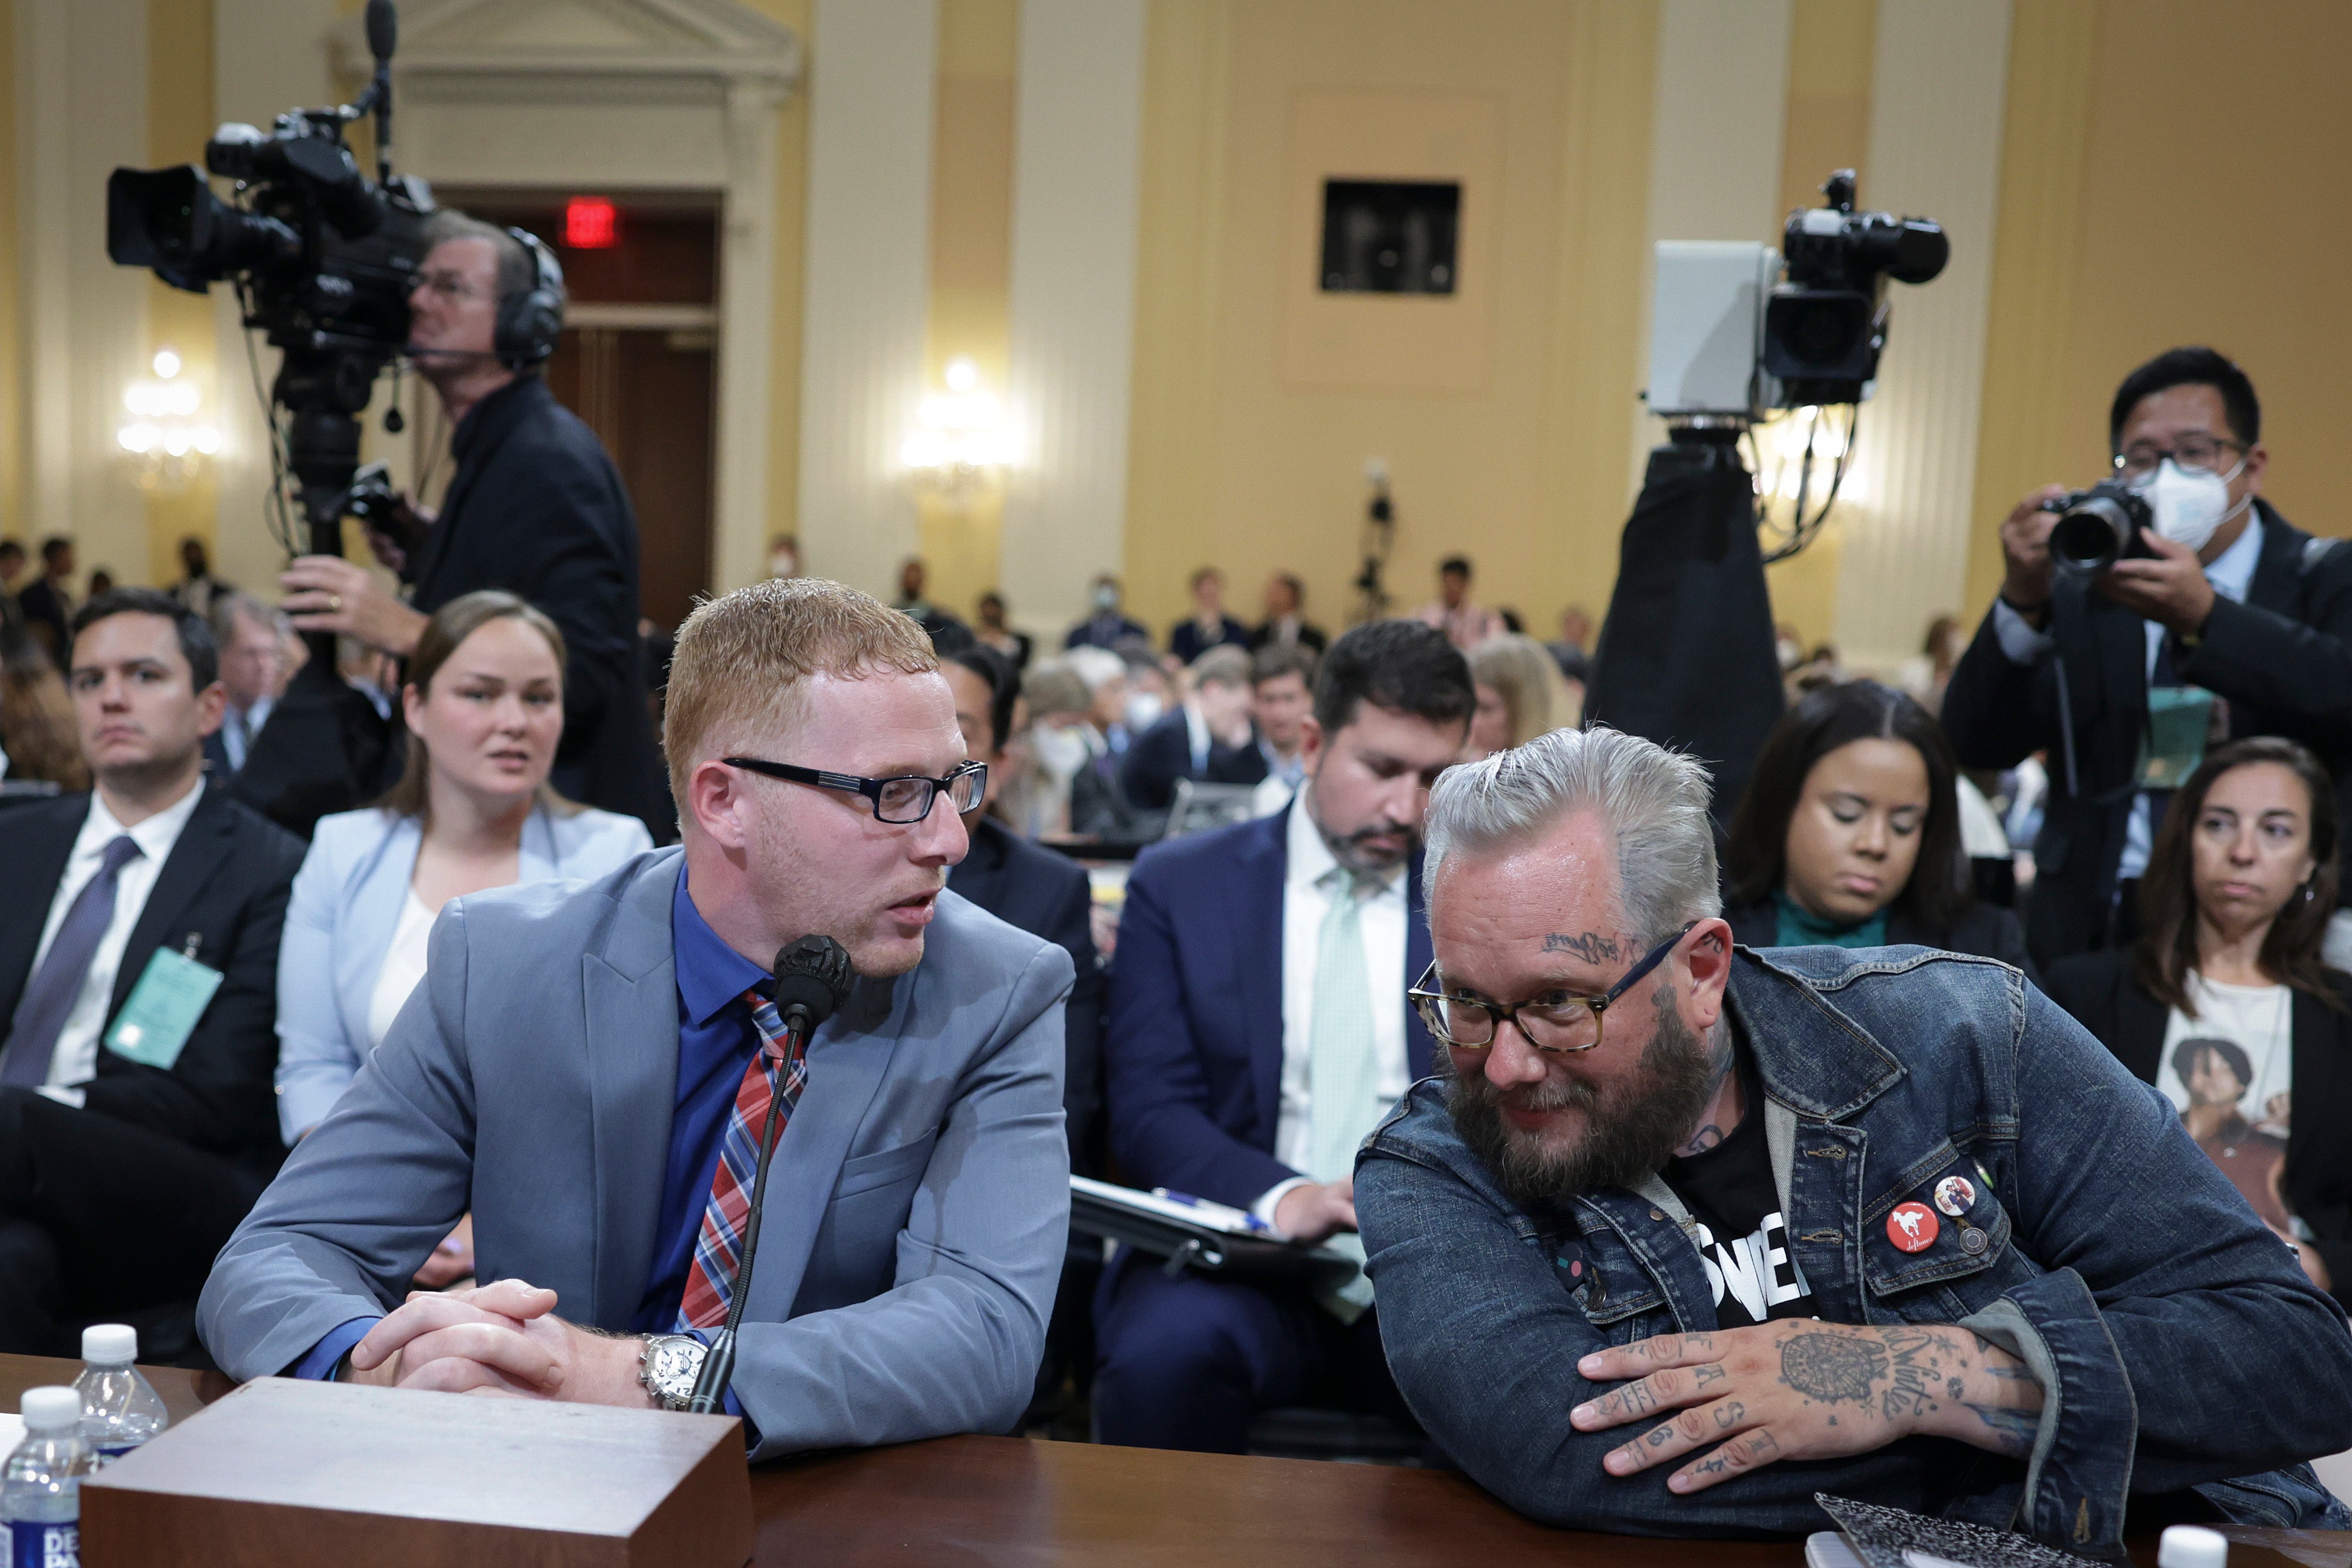 Stephen Ayres (L), who entered the U.S. Capitol illegally on January 6, 2021, confers with Jason Van Tatenhove (R), who served as national spokesman for the Oath Keepers